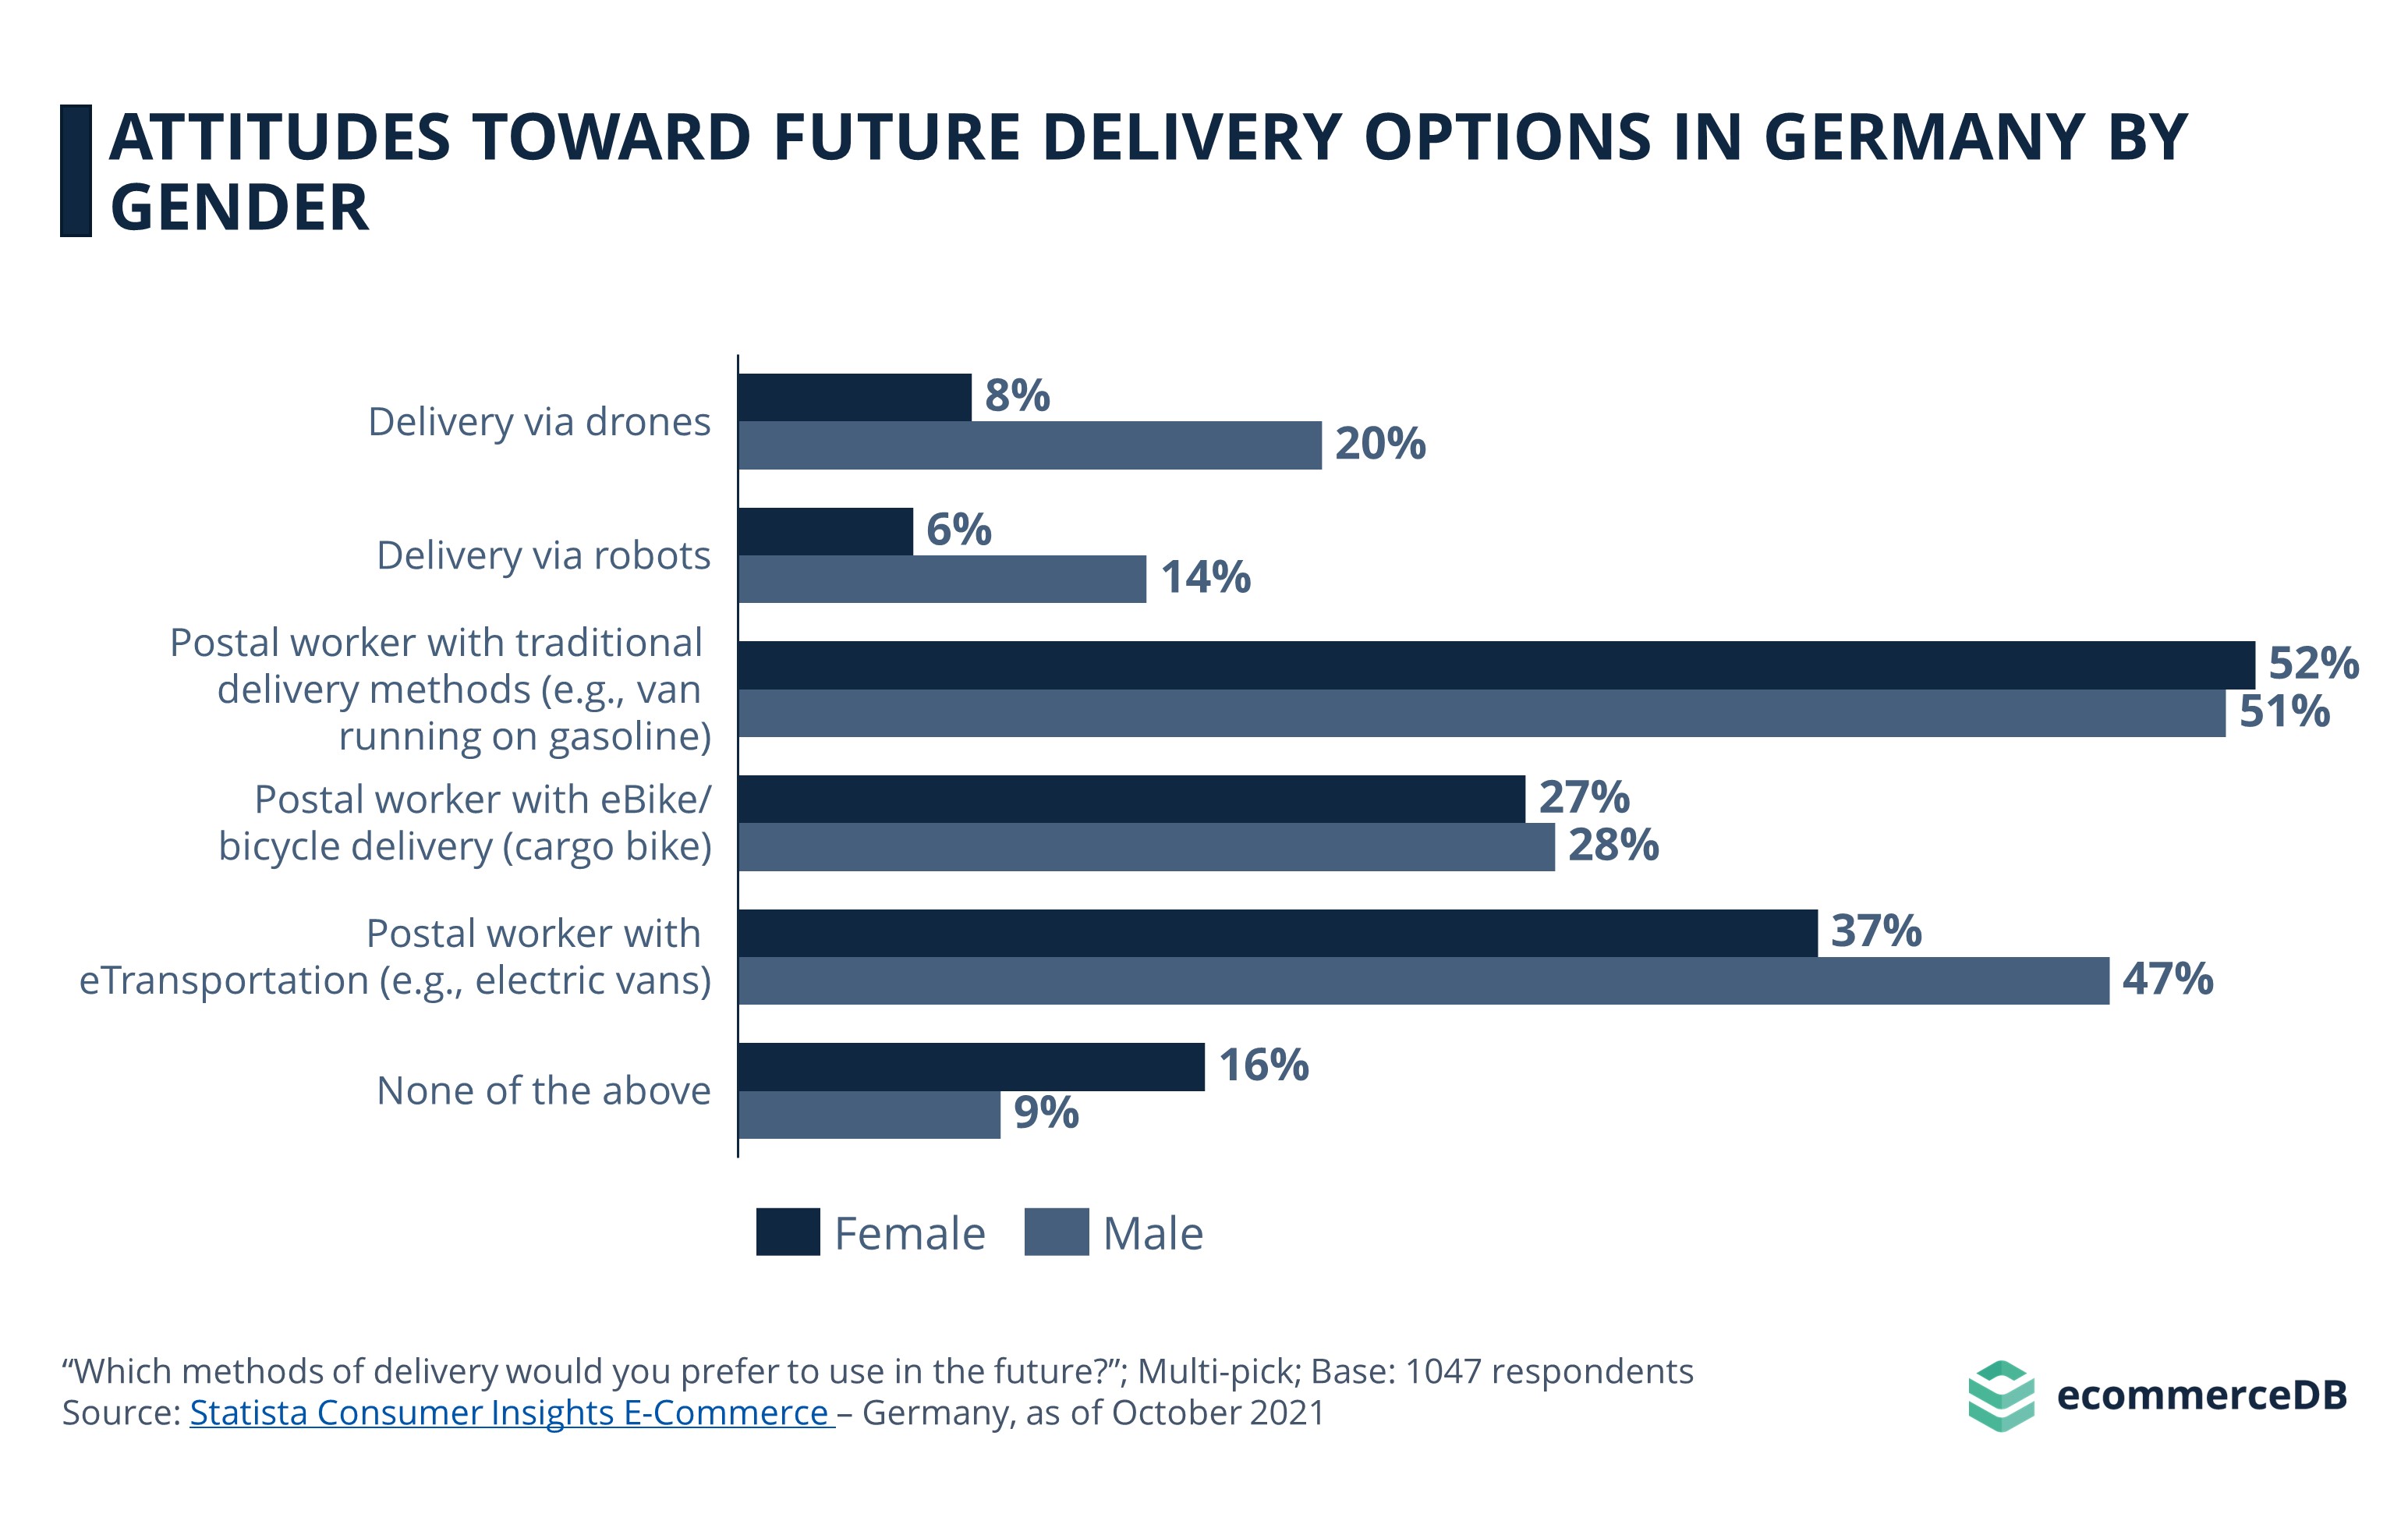 Attitudes toward future delivery option in Germany by gender